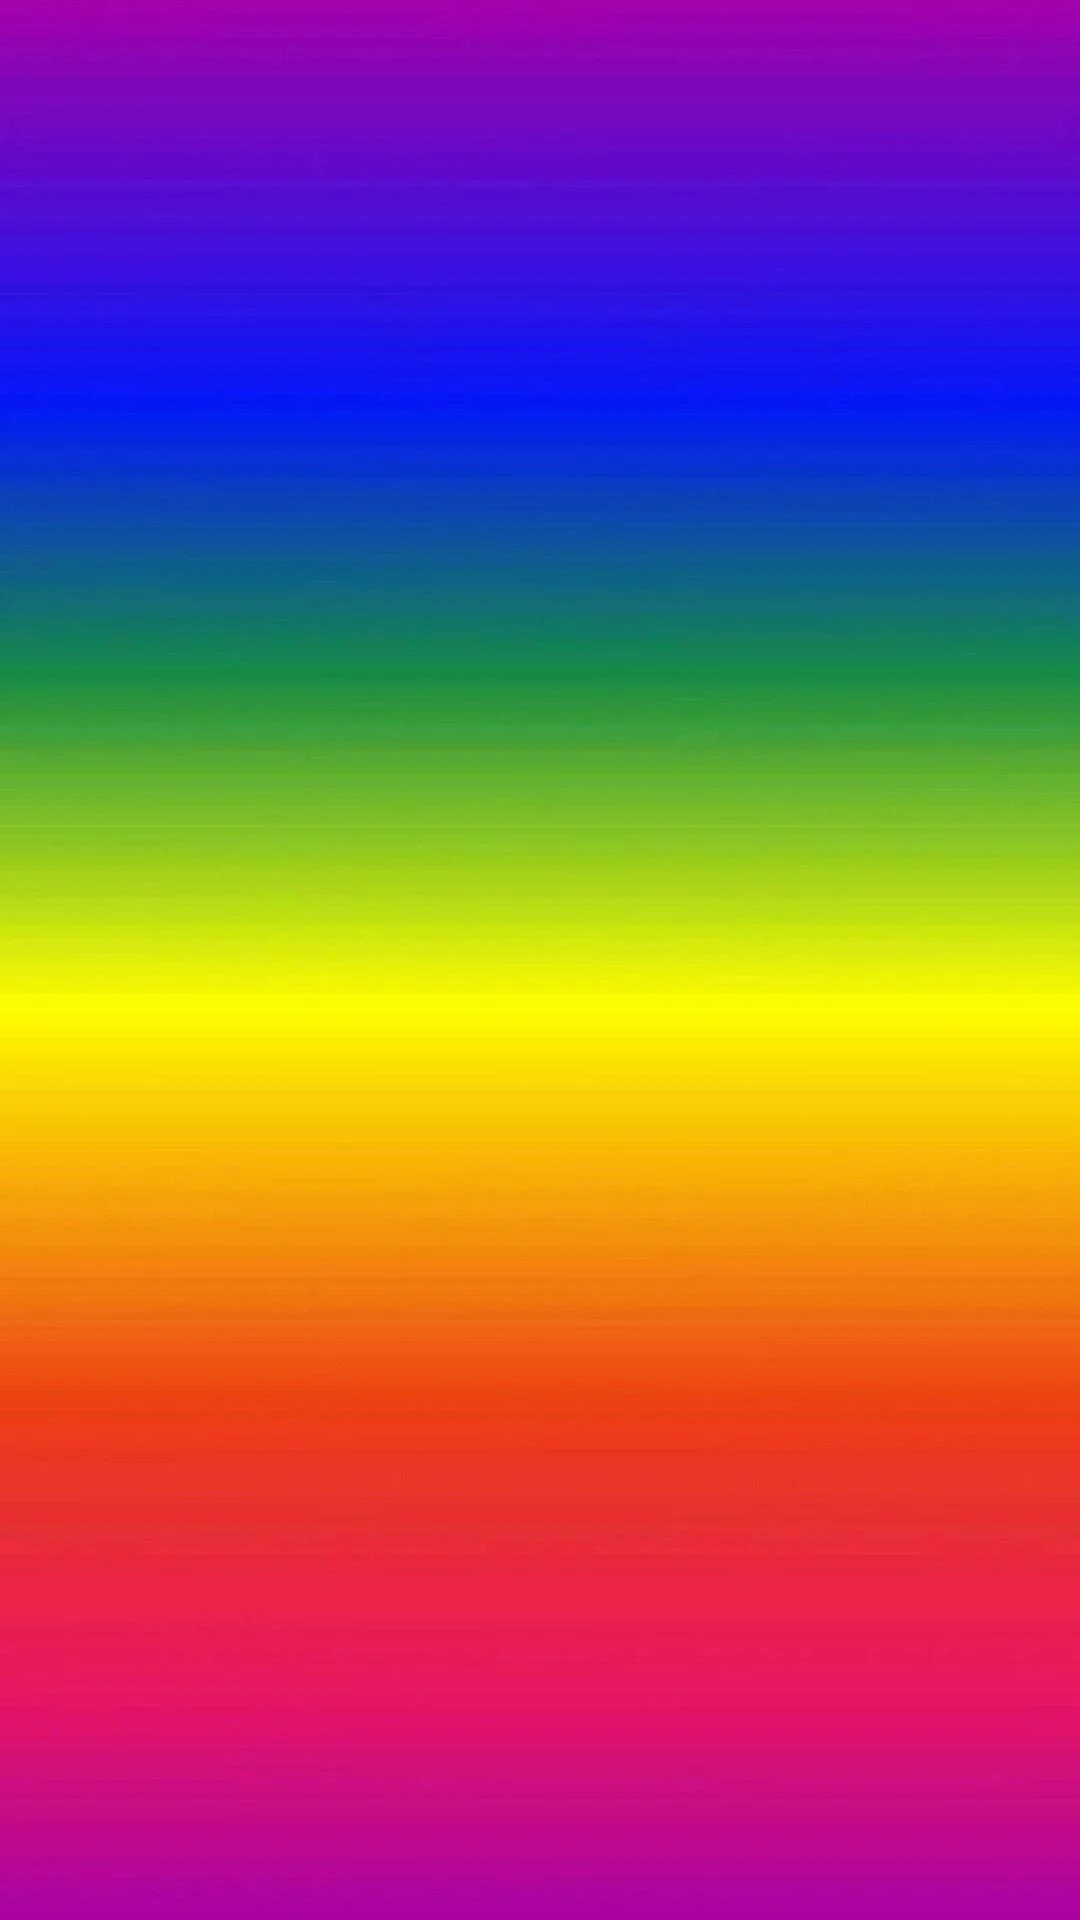 Rainbow colors wallpapers, Diverse color spectrum, Vibrant and lively, Colorful backdrops, 1080x1920 Full HD Handy